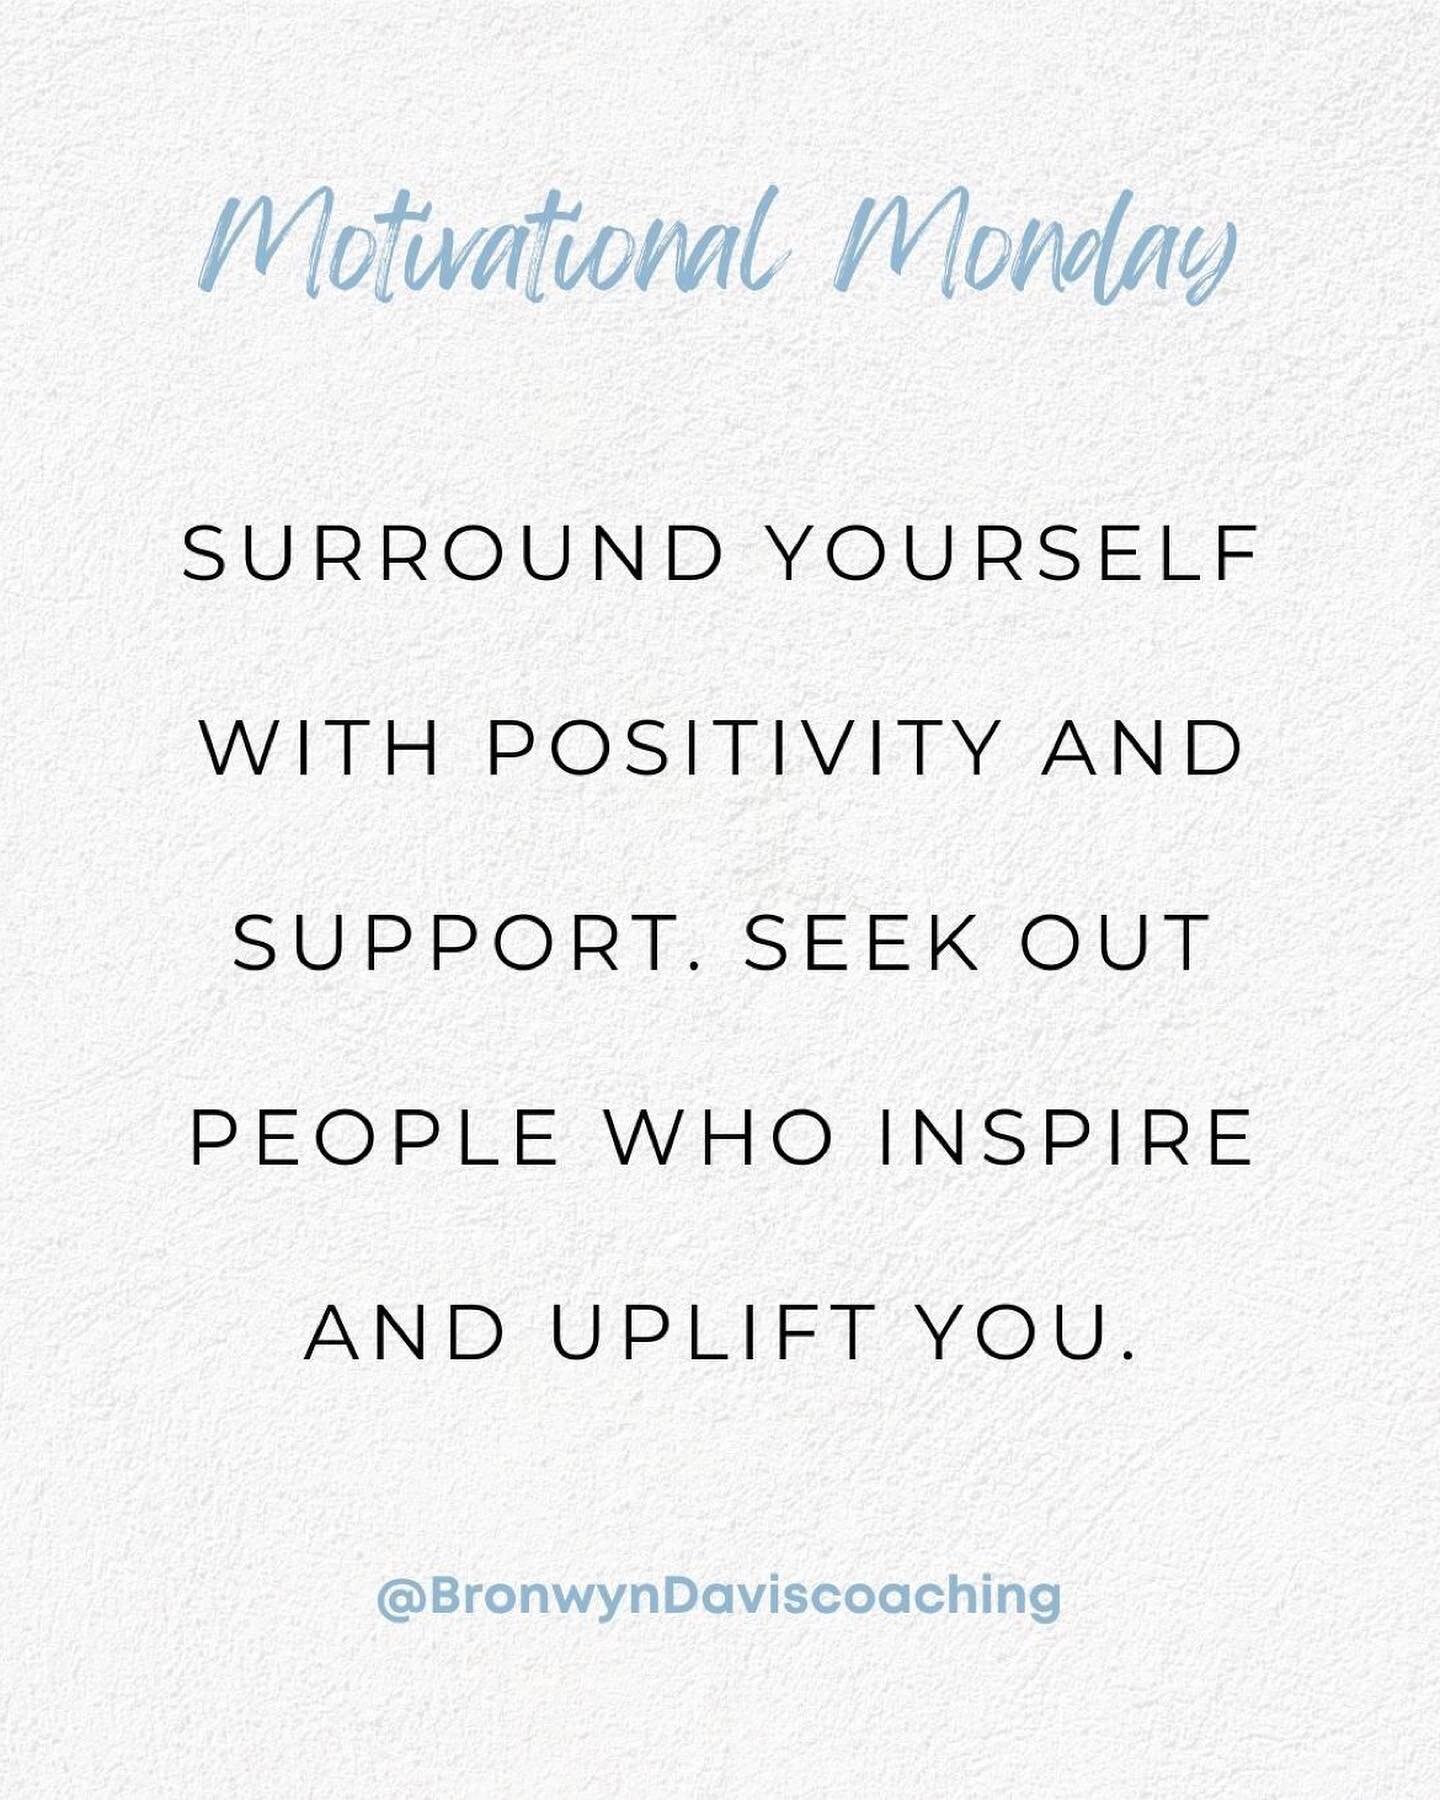 Who you surround yourself with makes all the difference in life.

Are the people around you positive and uplifting? Do they support you and encourage you to go to your next level of joy and fulfillment?

Tag that one special person below who&rsquo;s 